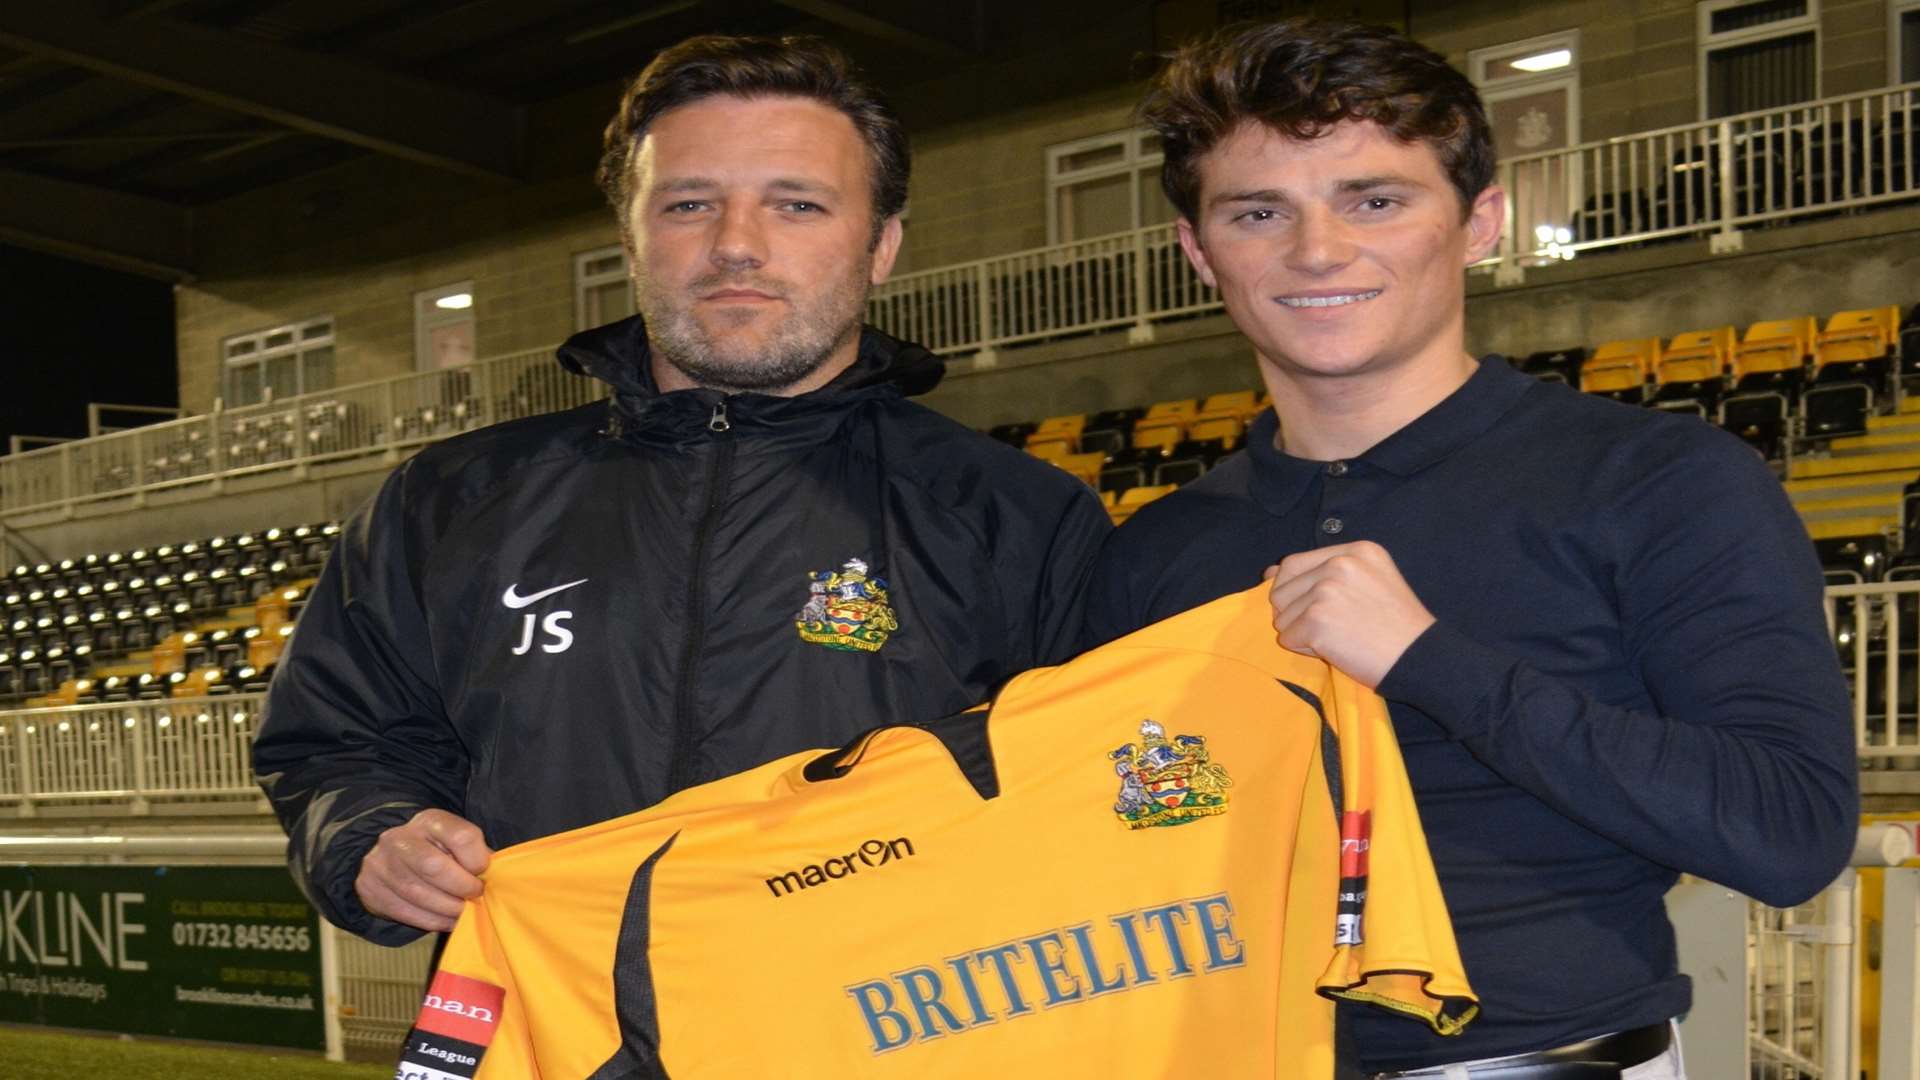 Maidstone boss Jay Saunders welcomes new signing Jack Paxman to the Gallagher Stadium